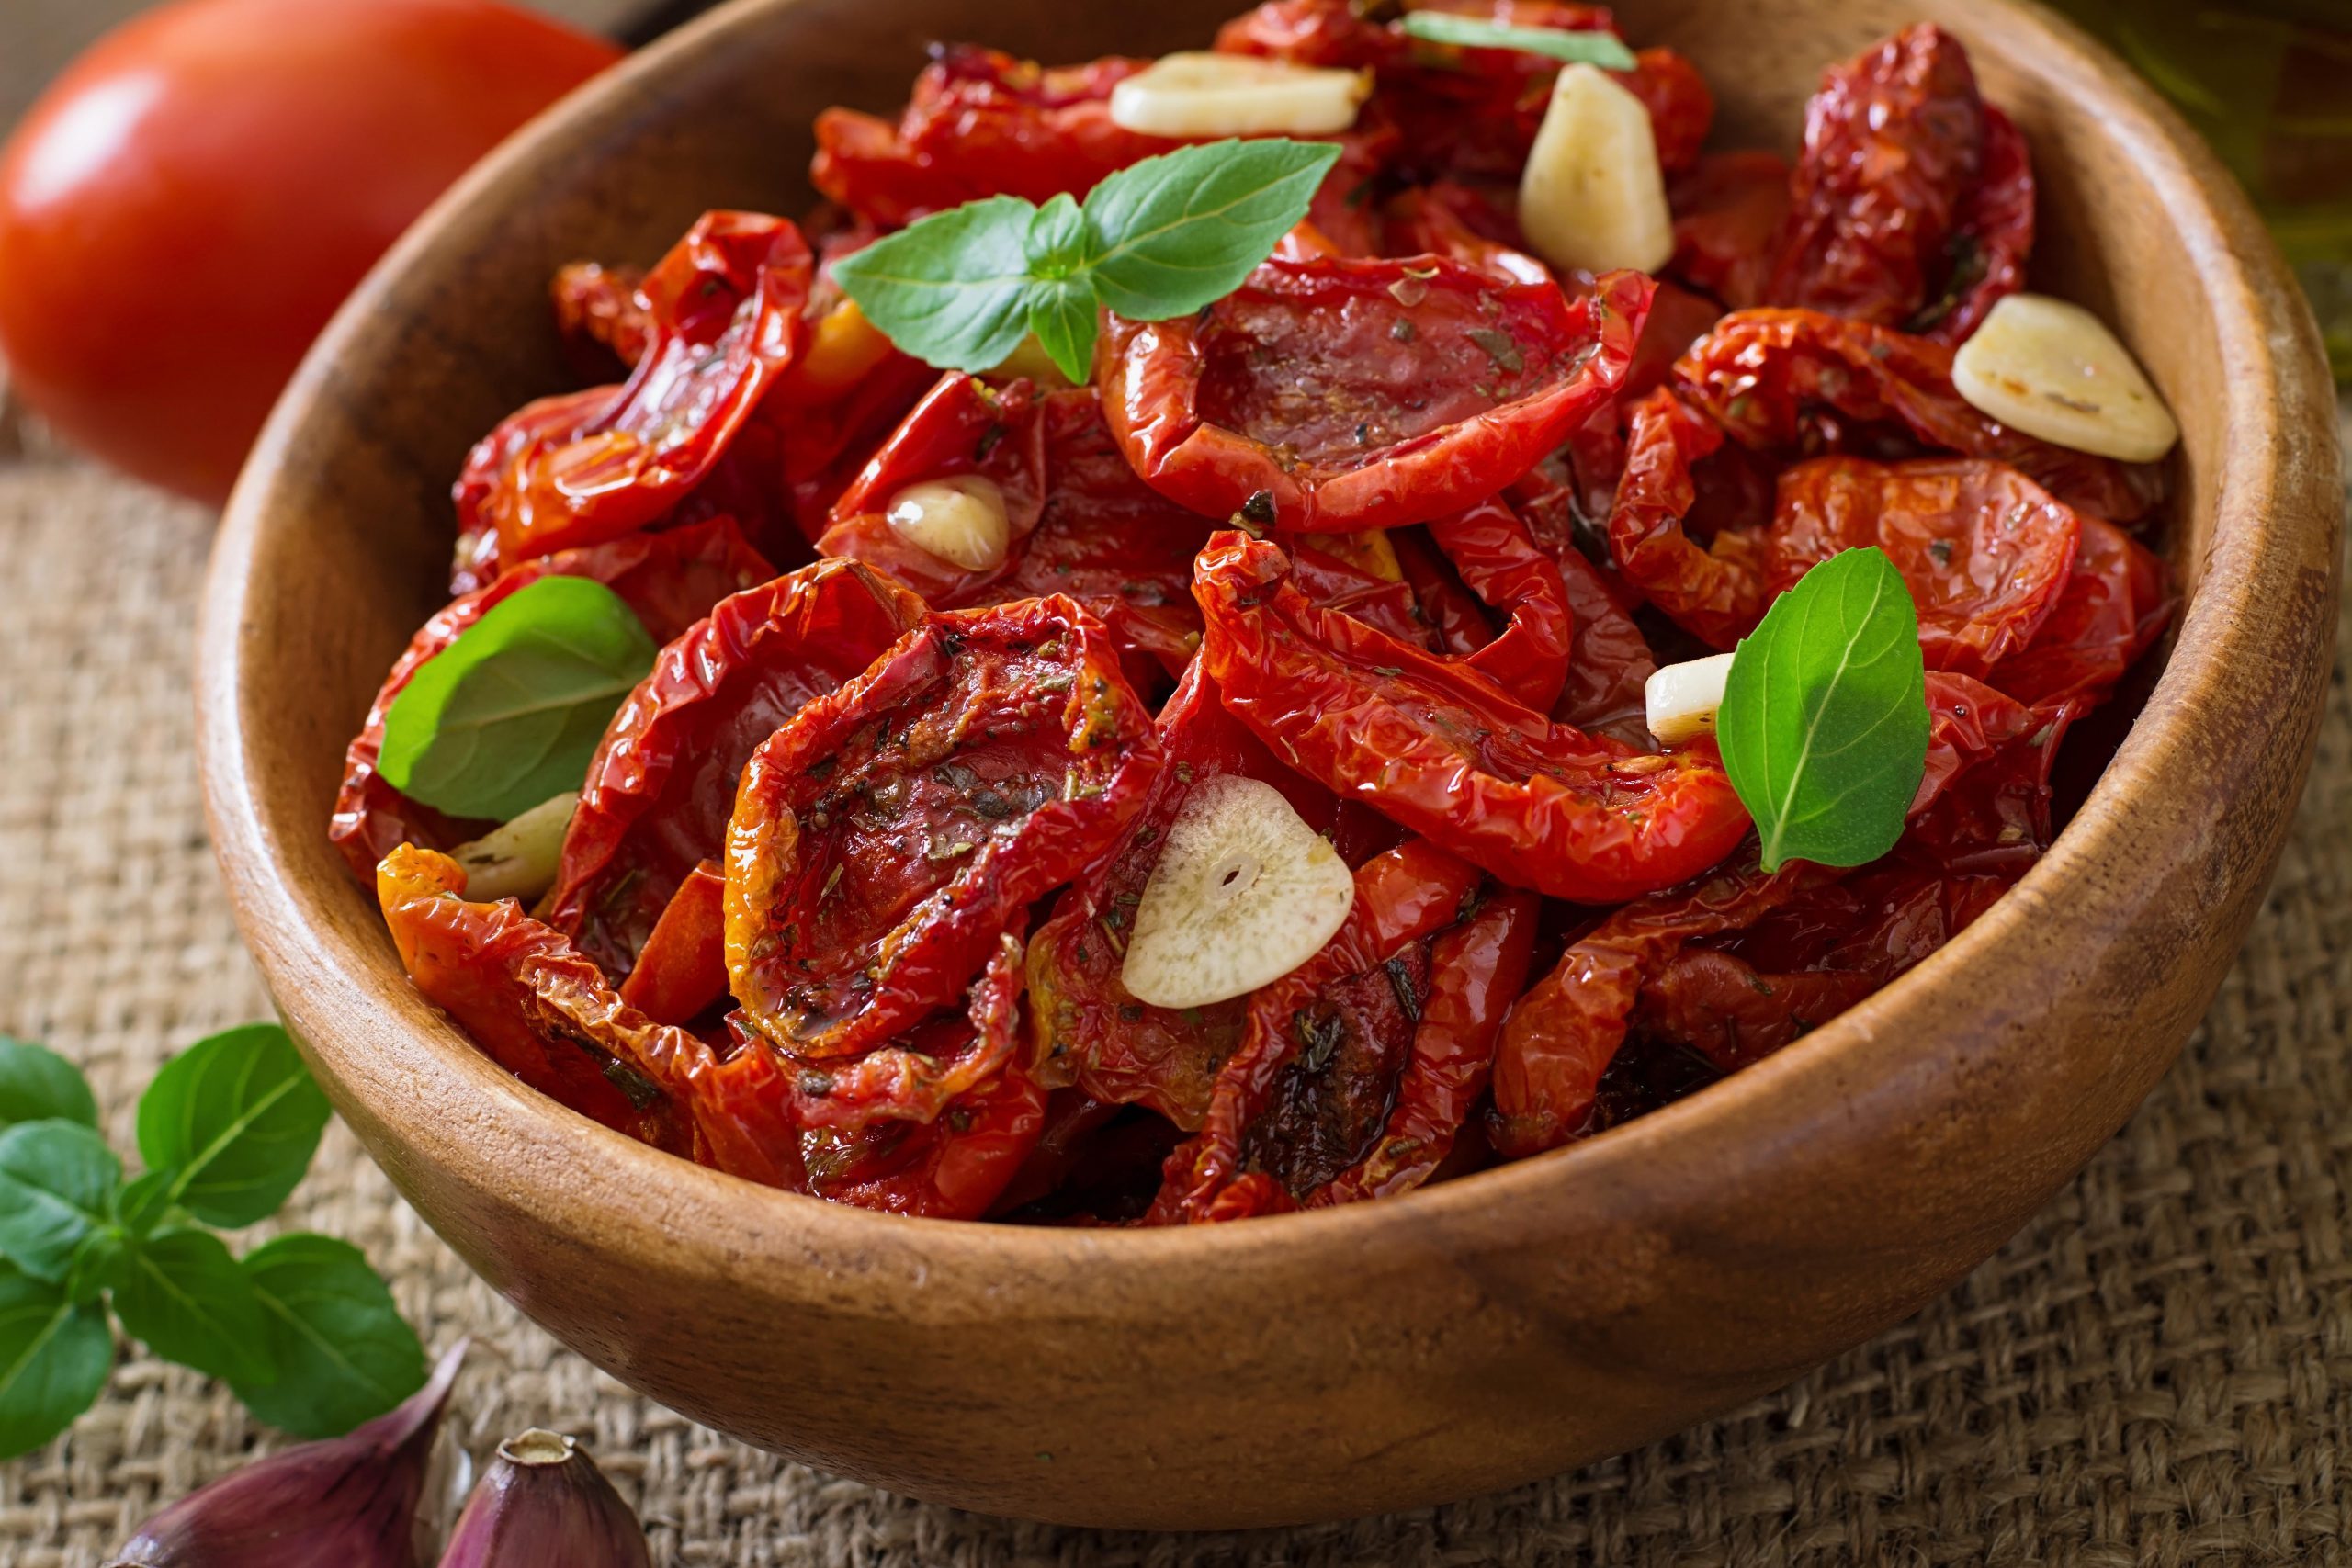 How to Make Sun Dried Tomatoes - The Daring Gourmet